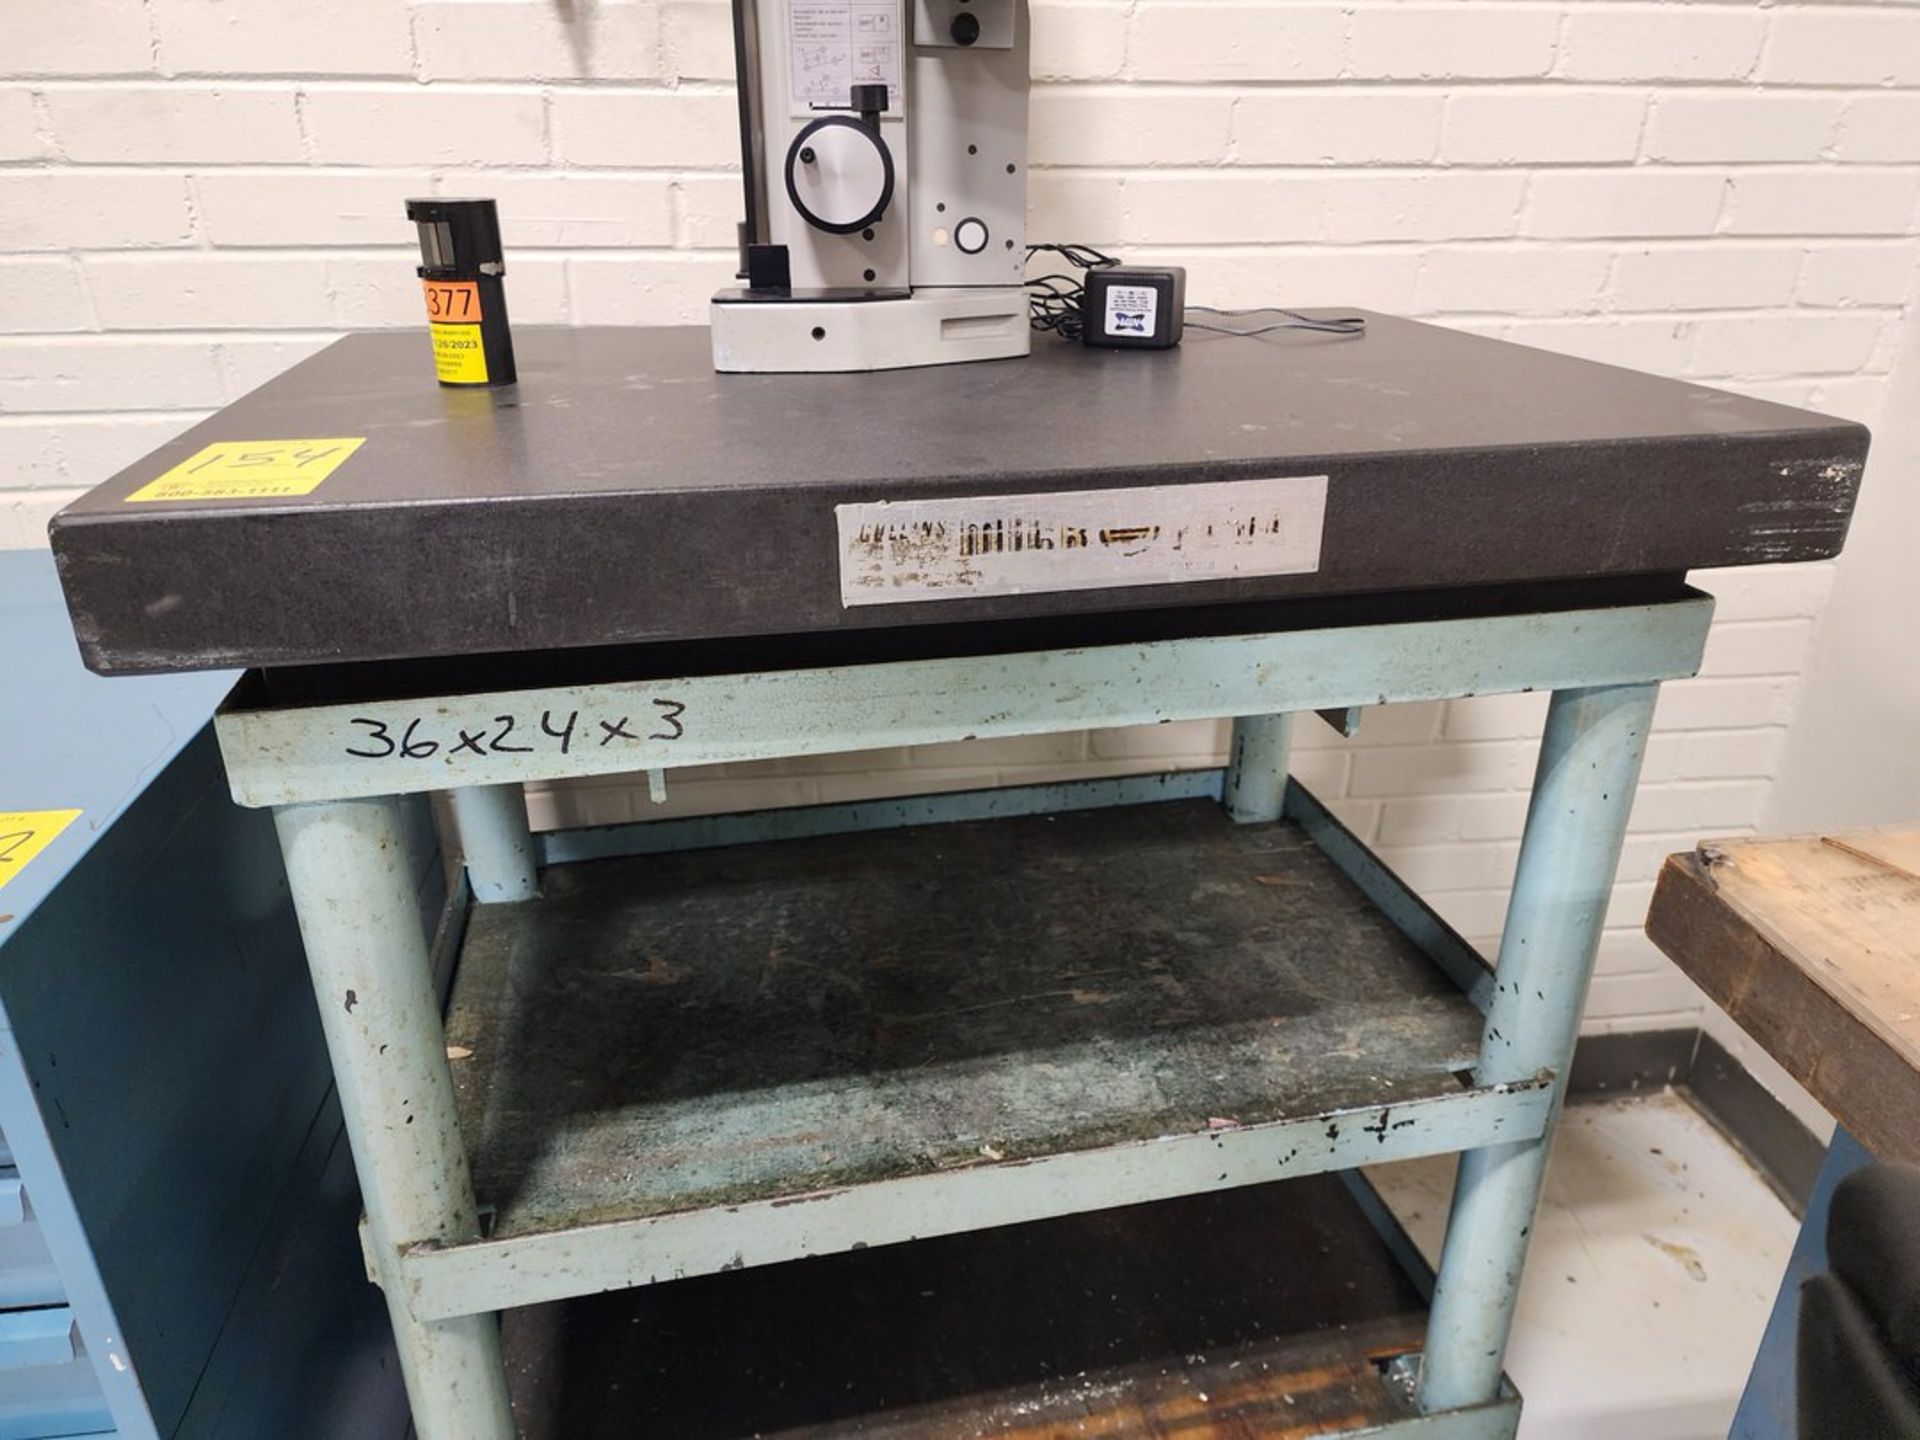 Granite Table 36" x 24" x 3" W/ Stand (Toyoda CNC Area) - Image 3 of 3